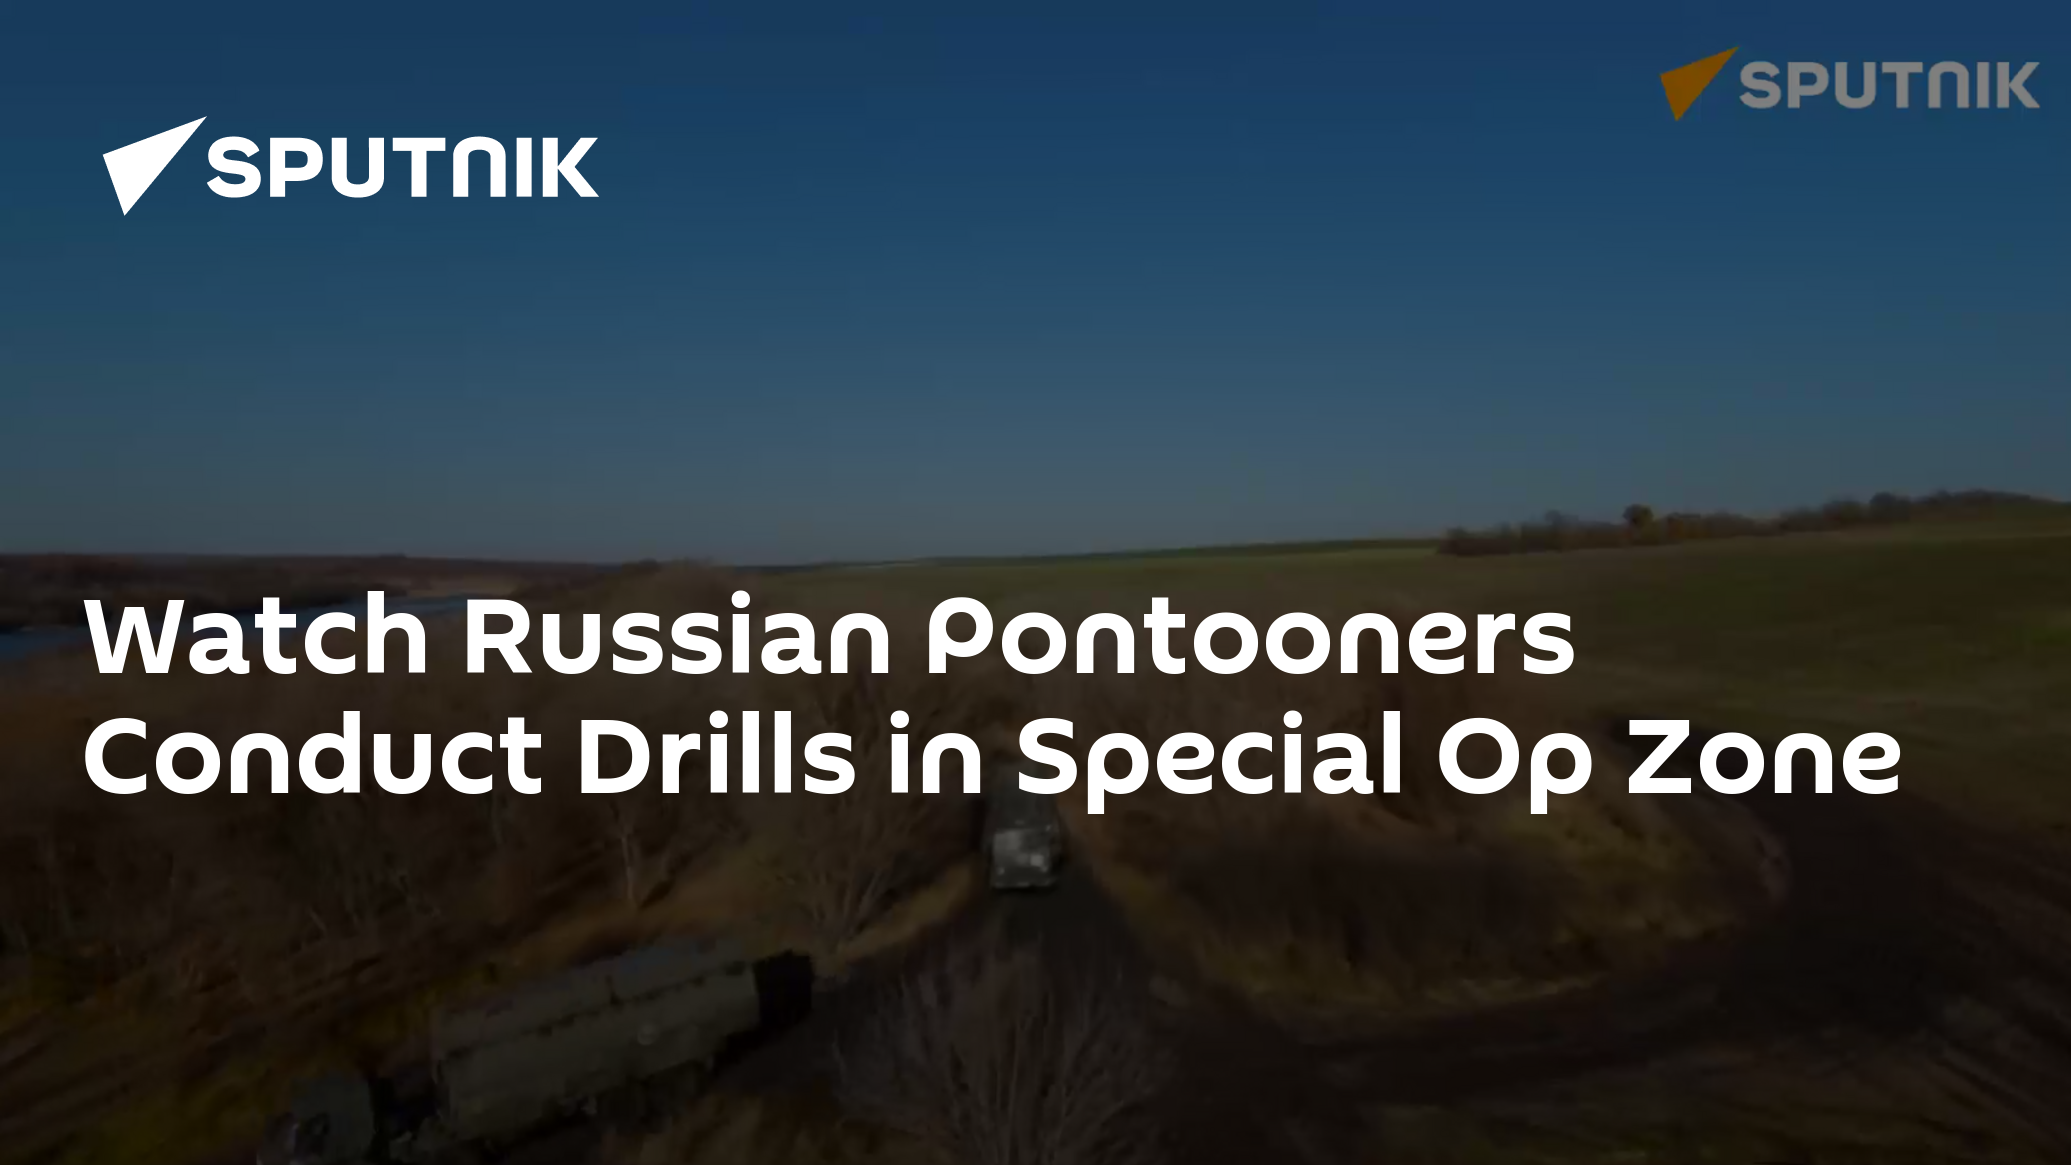 Watch Russian Pontooners Conduct Drills in Special Op Zone